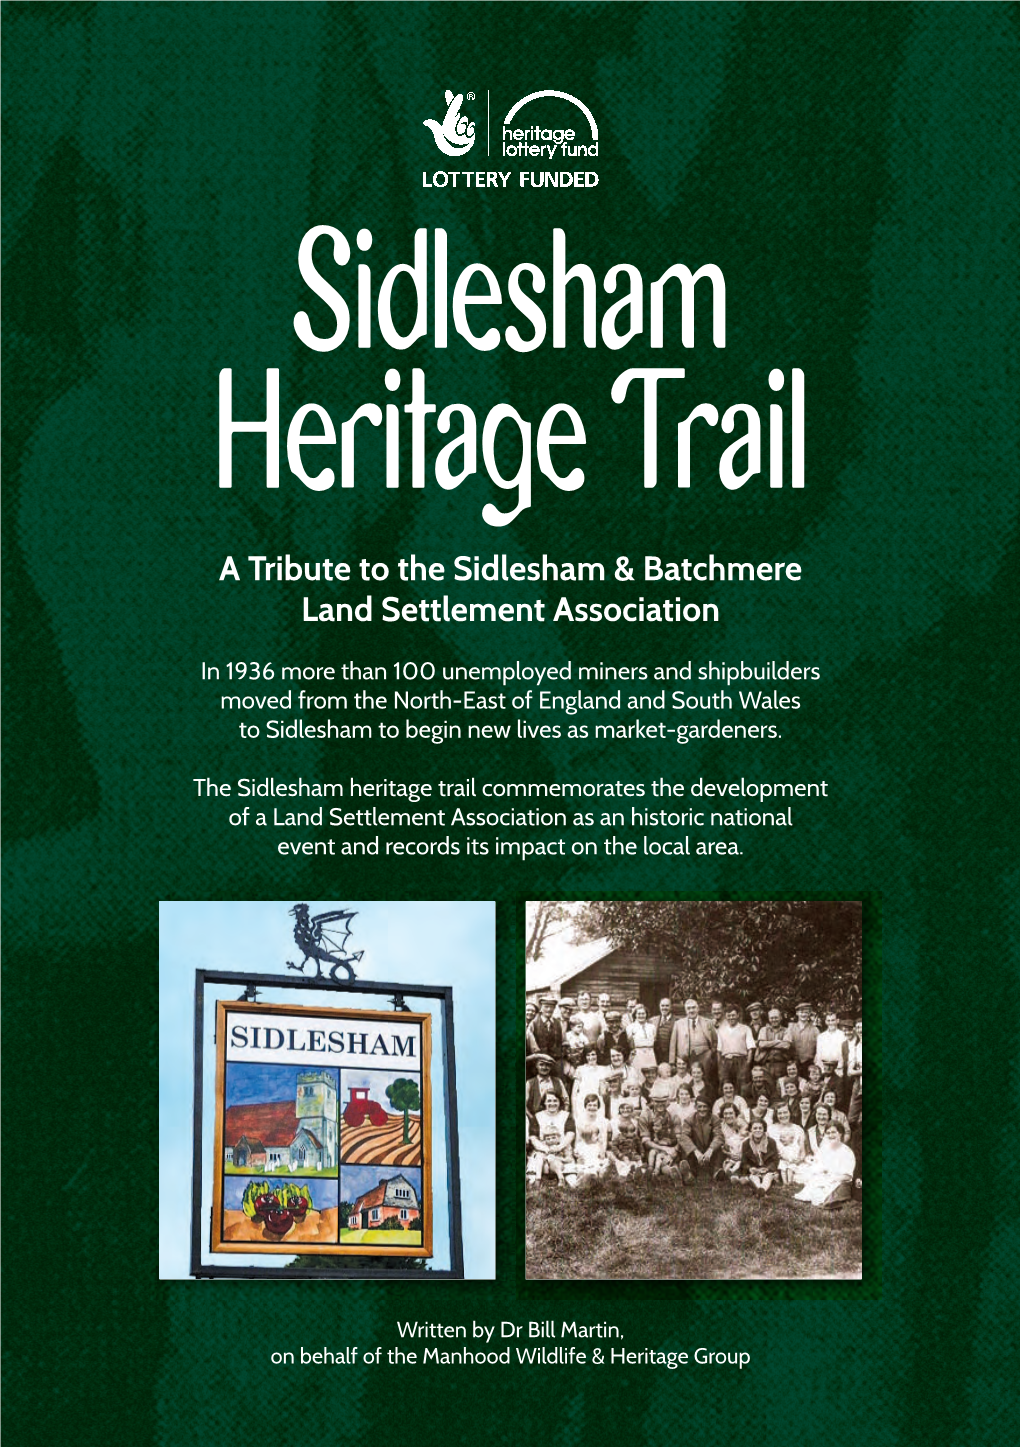 A Tribute to the Sidlesham & Batchmere Land Settlement